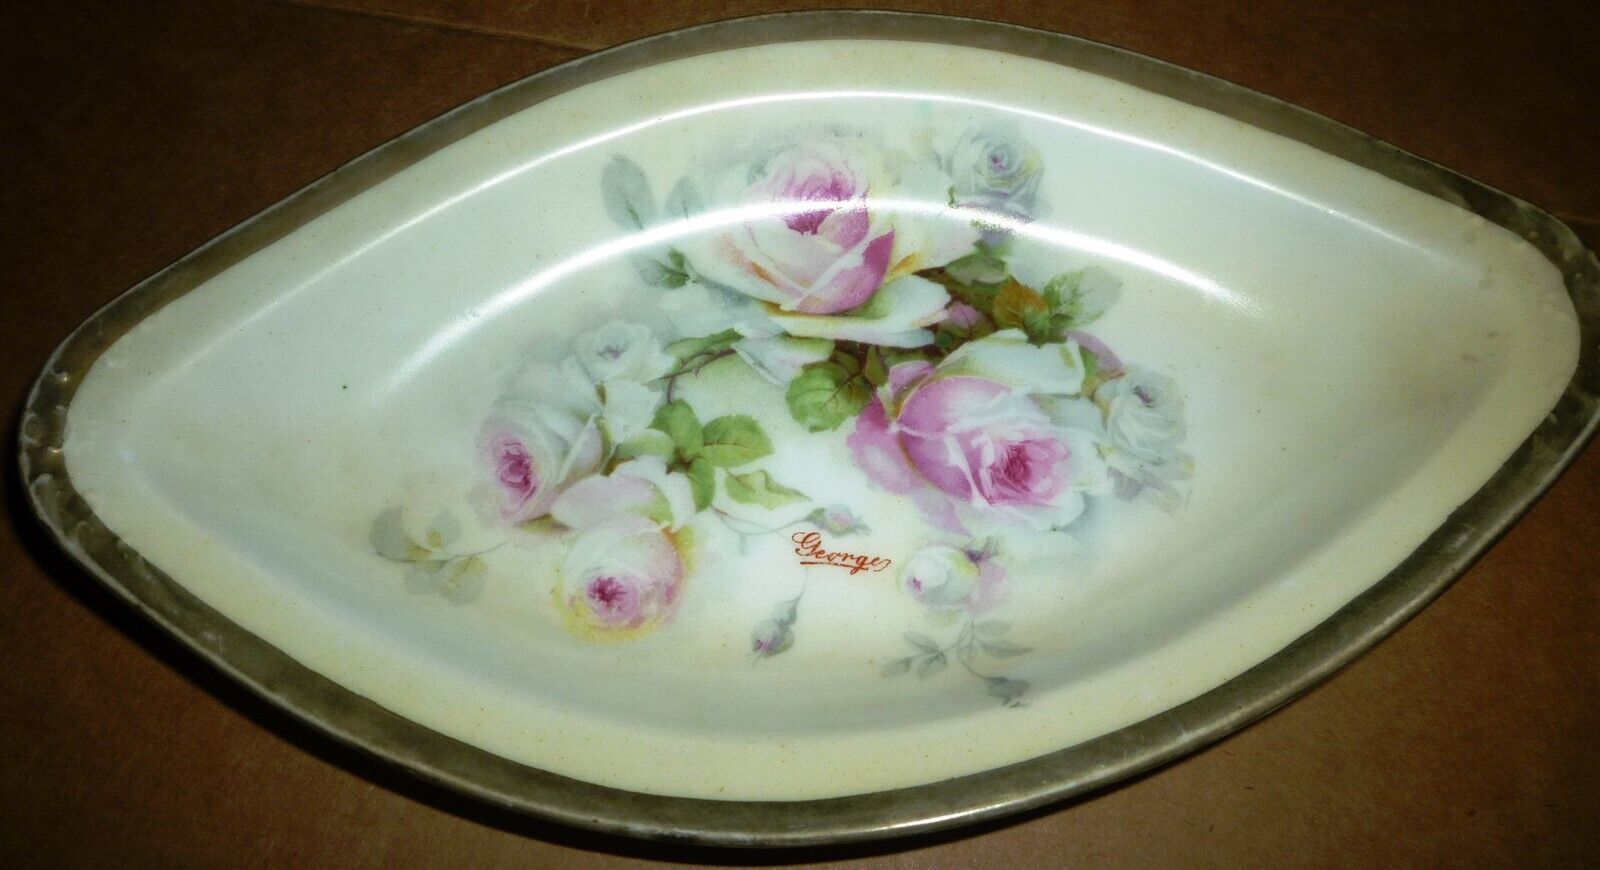 STUNNING ANTIQUE O & E.G. ROYAL AUSTRIA PLATTER HANDPAINTED ROSES GEORGES SIGNED